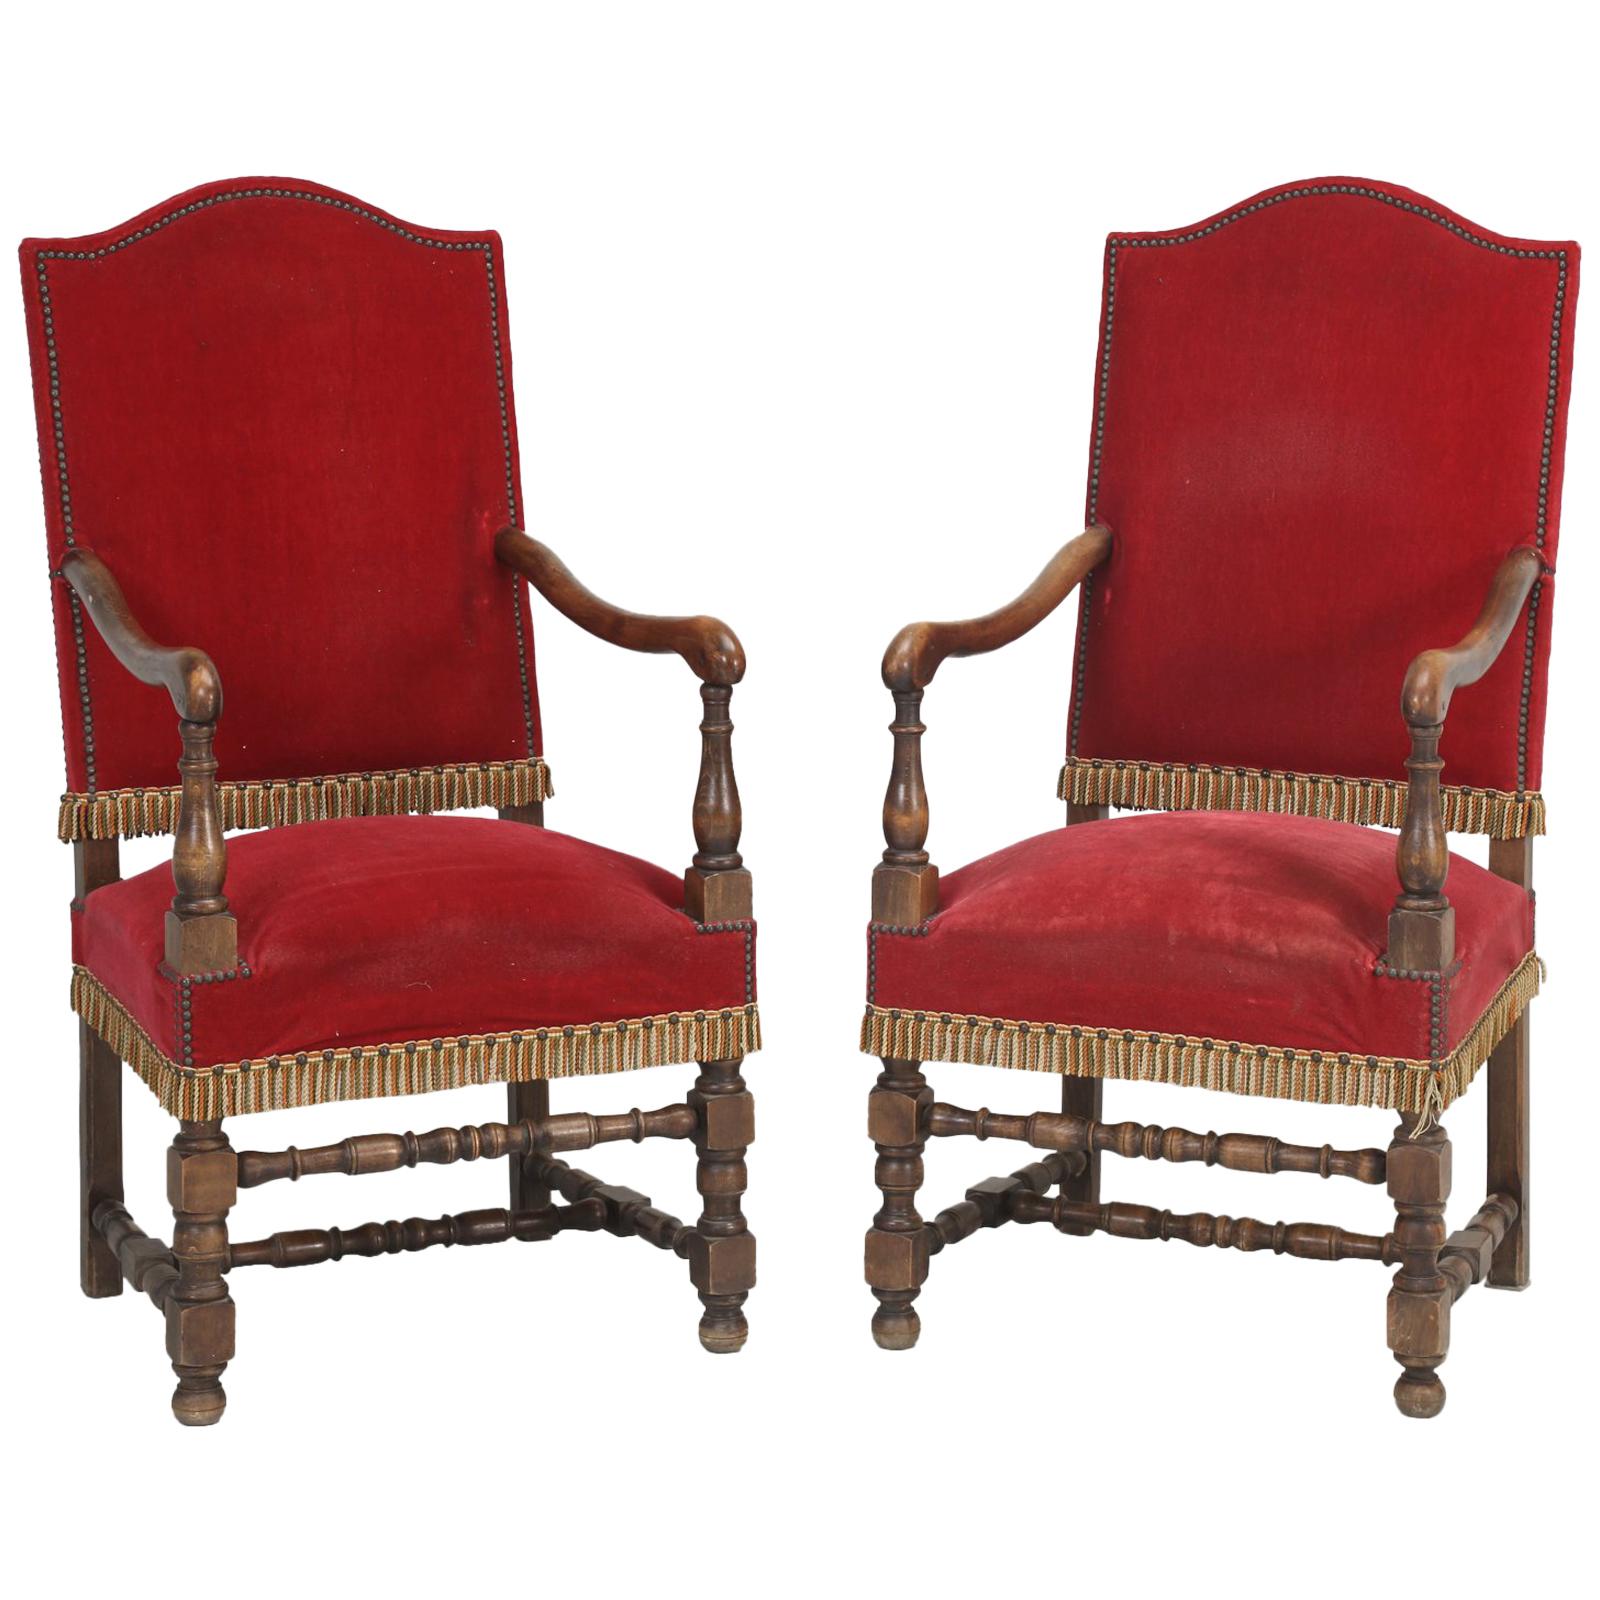 Antique Pair of French Arm or Throne Chairs, circa 1880 For Sale